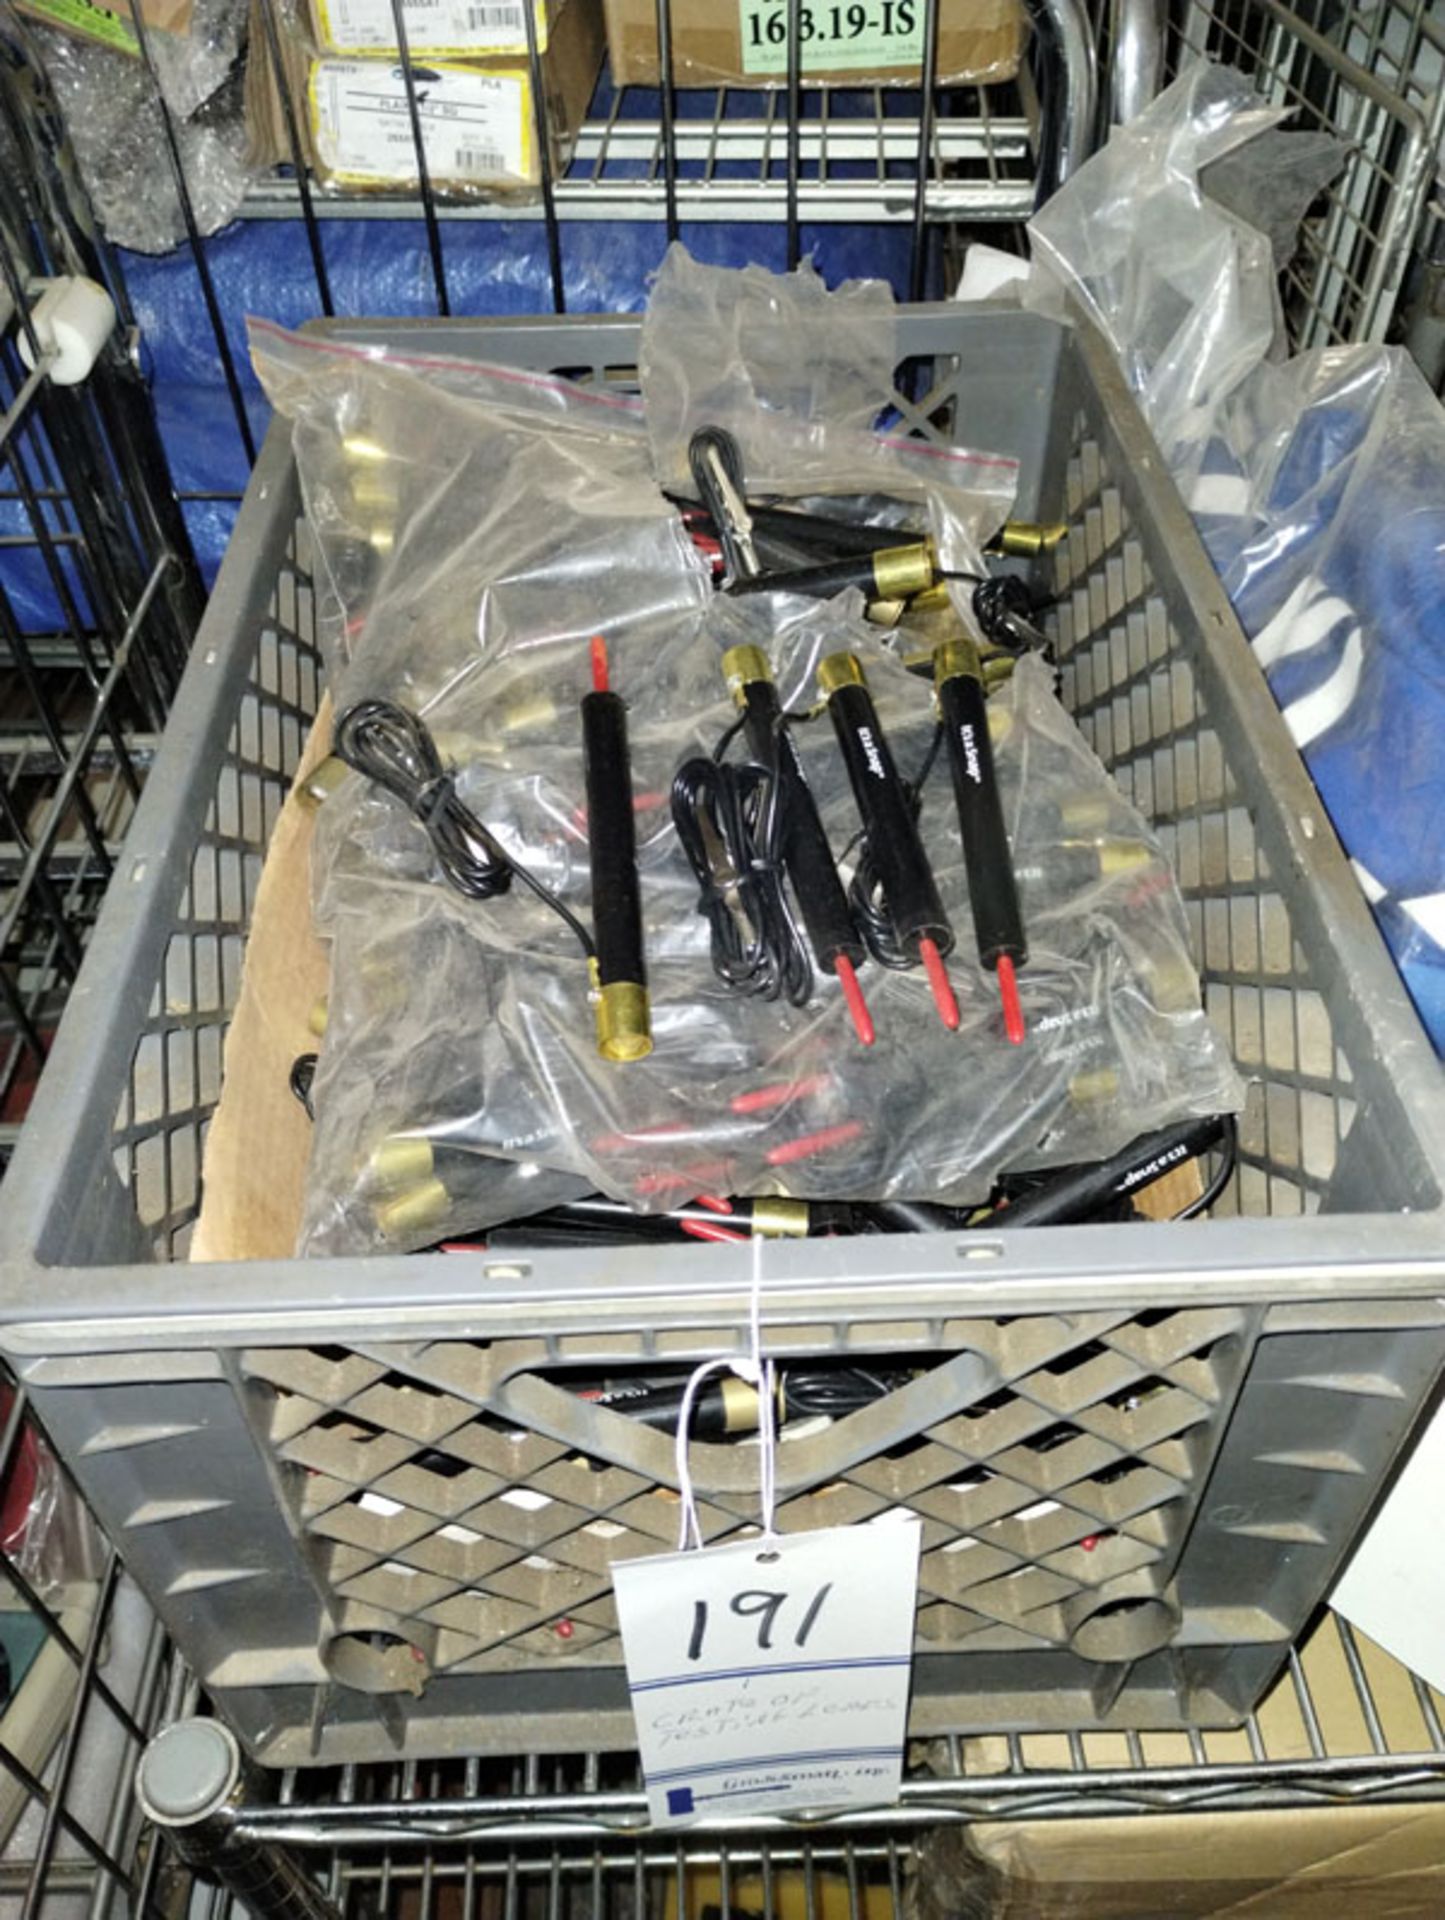 CRATE OF TESTING LEADS